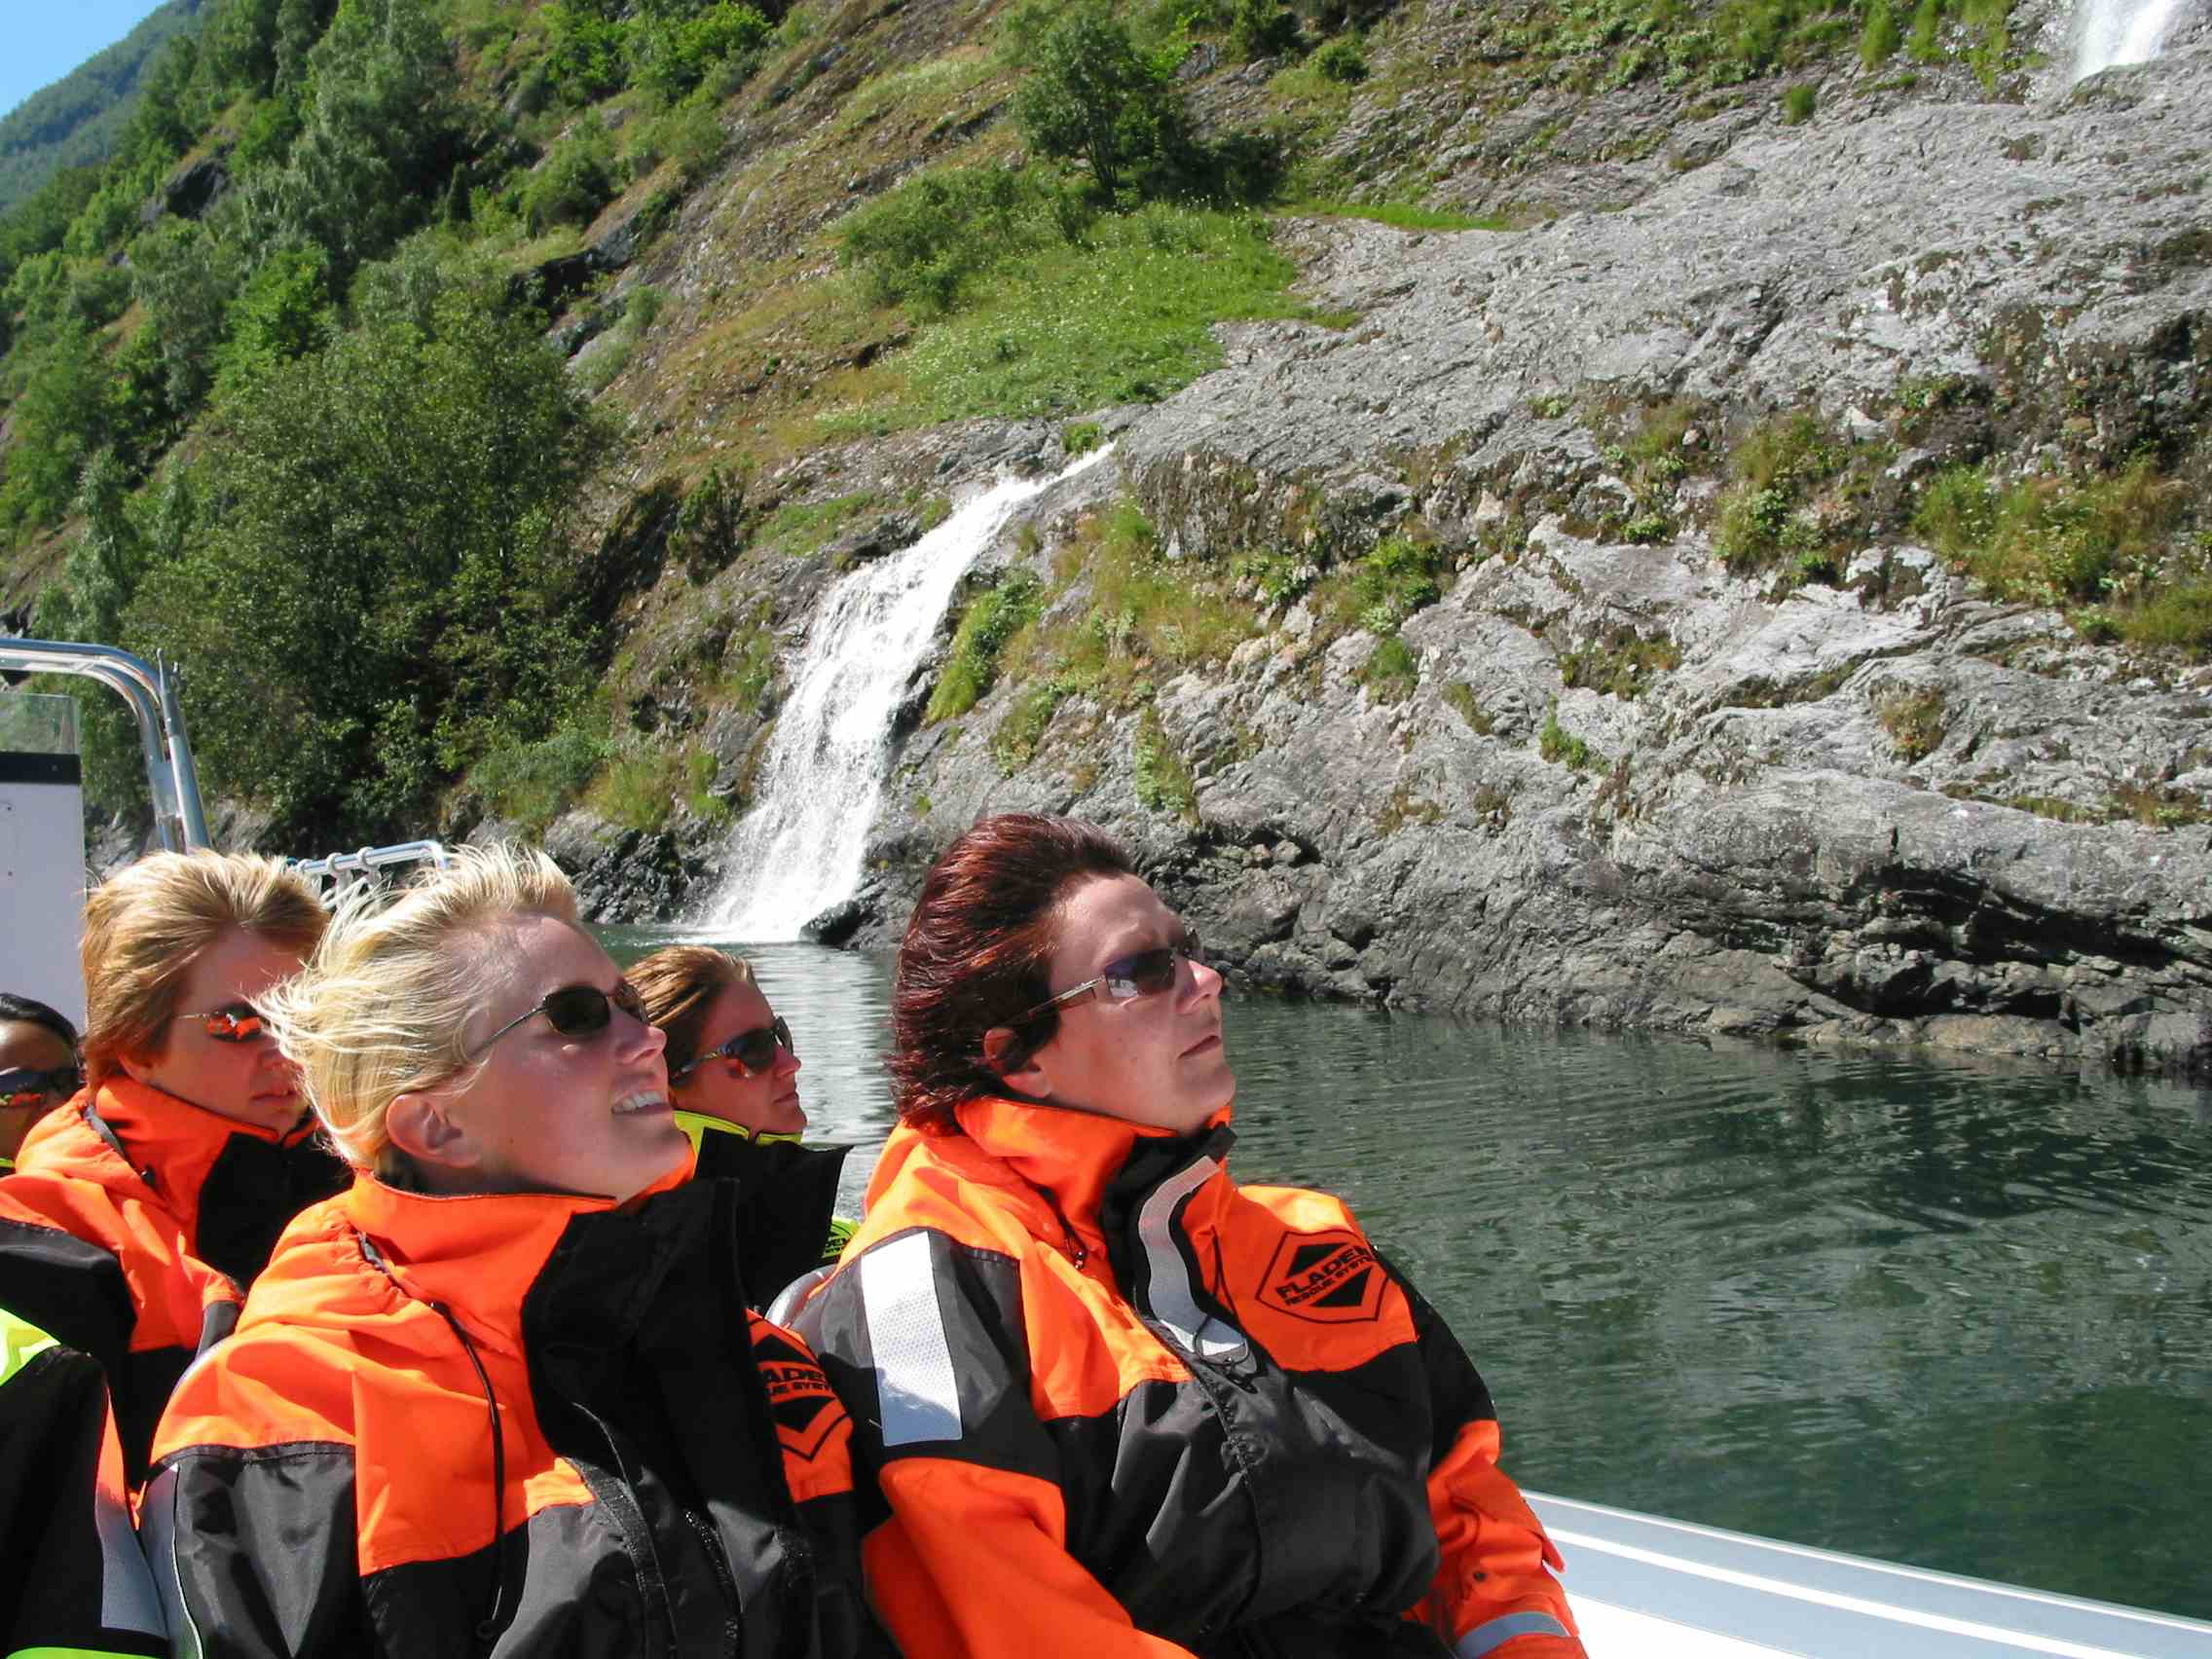 Basic fjord tour from Bergen